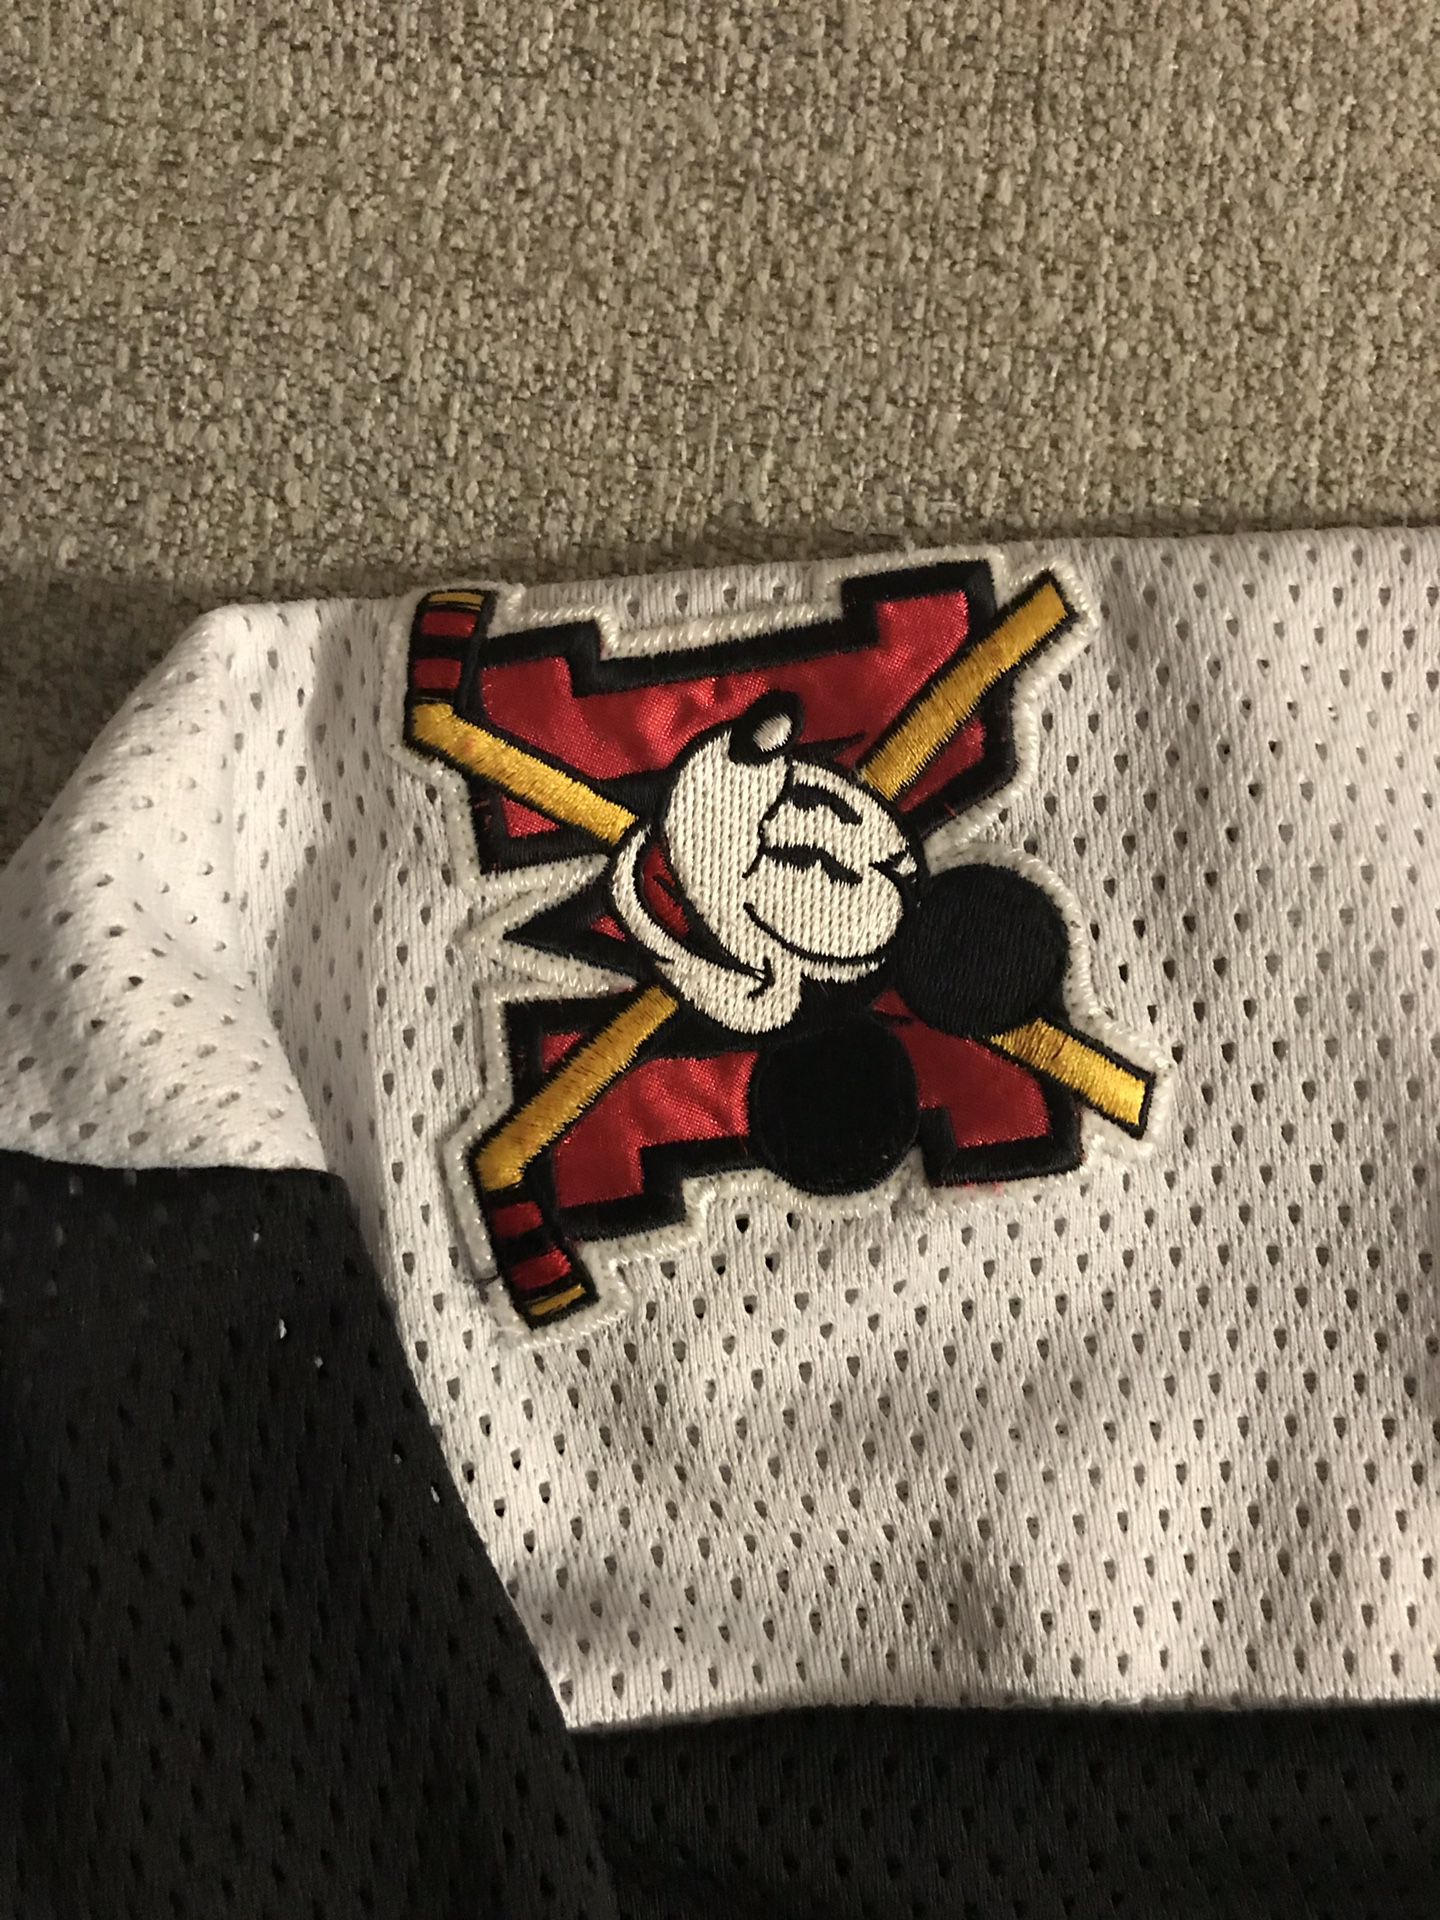 Shorsey Letterkenny Jersey for Sale in Lakewood, CO - OfferUp